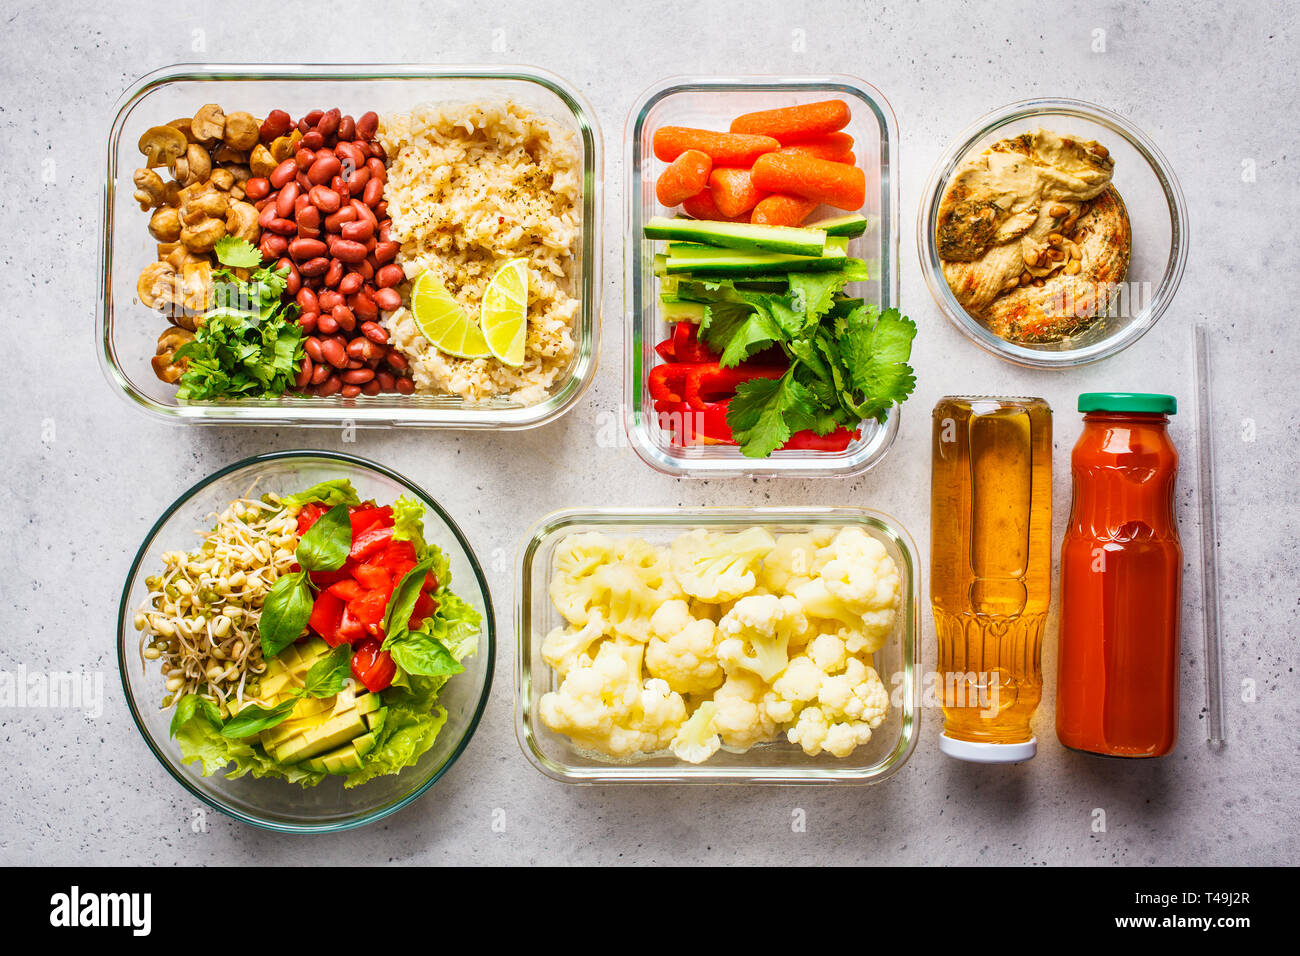 Healthy vegan food in glass containers, top view. Rice, beans, vegetables,  hummus and juice for take-away lunch Stock Photo - Alamy